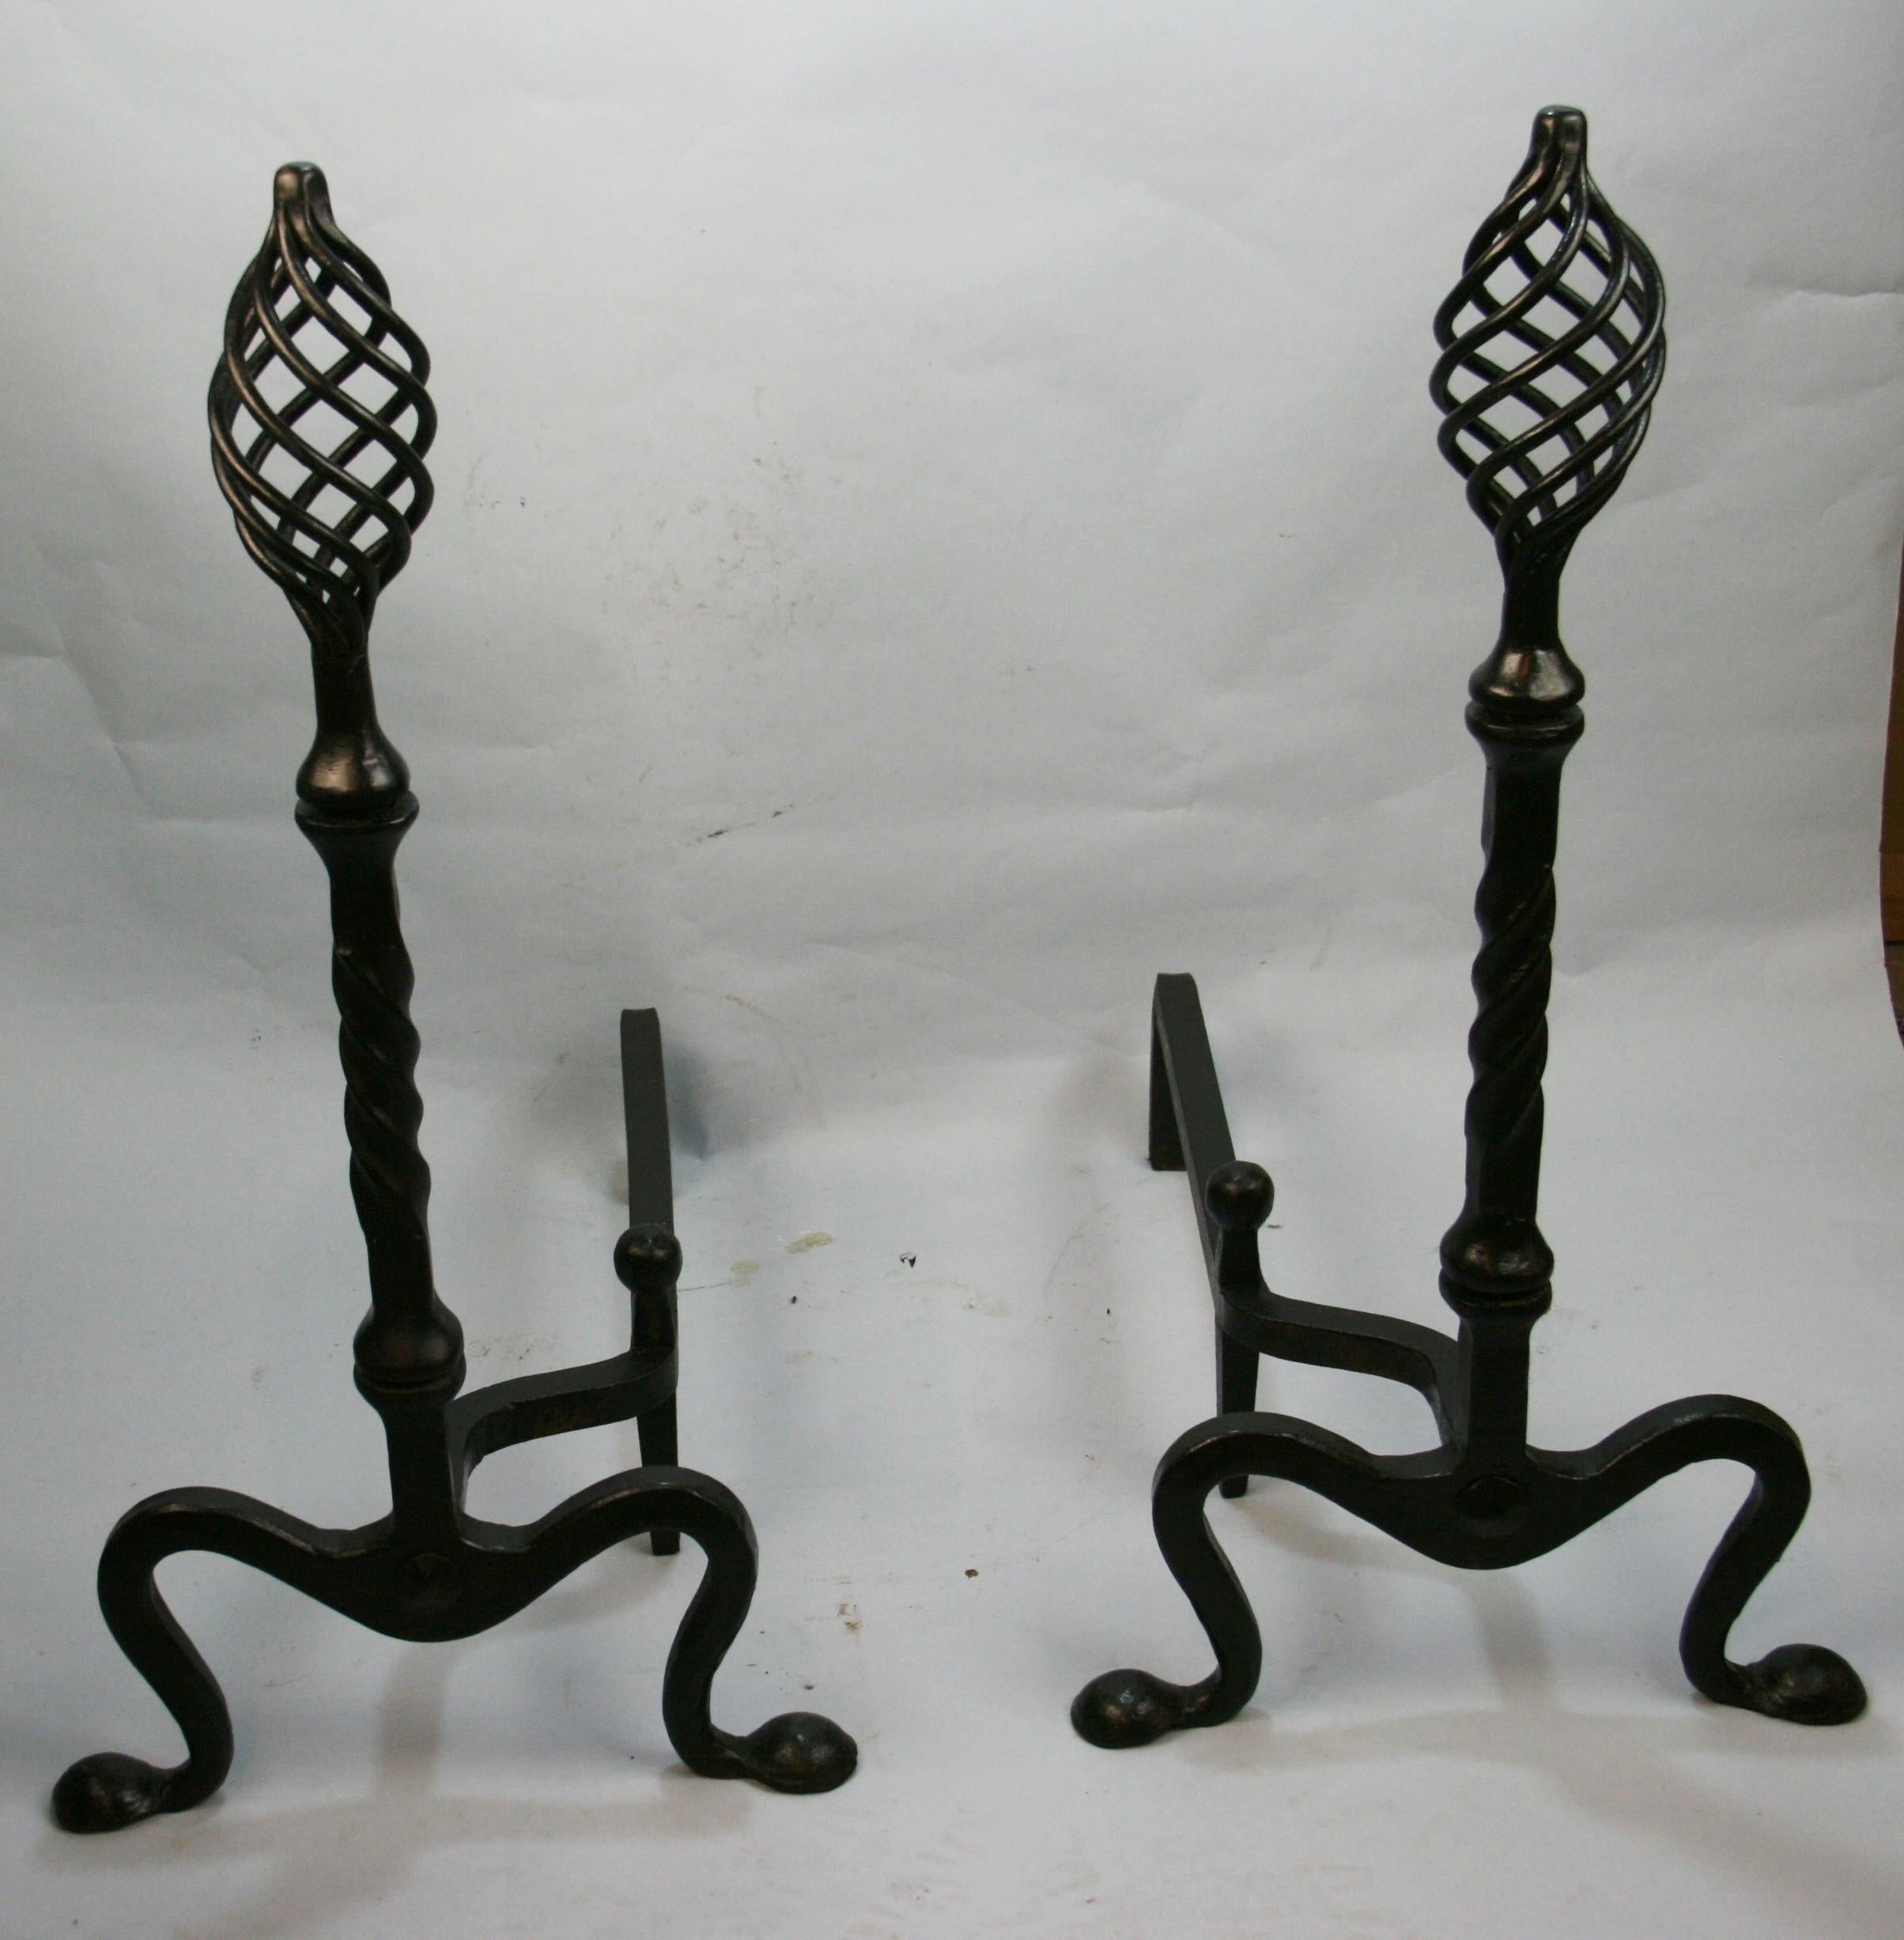 Pair hand forged andirons  mid 19th century.
Bird cage finials  spiral plinths and terminating on hand hammered  penny feet .